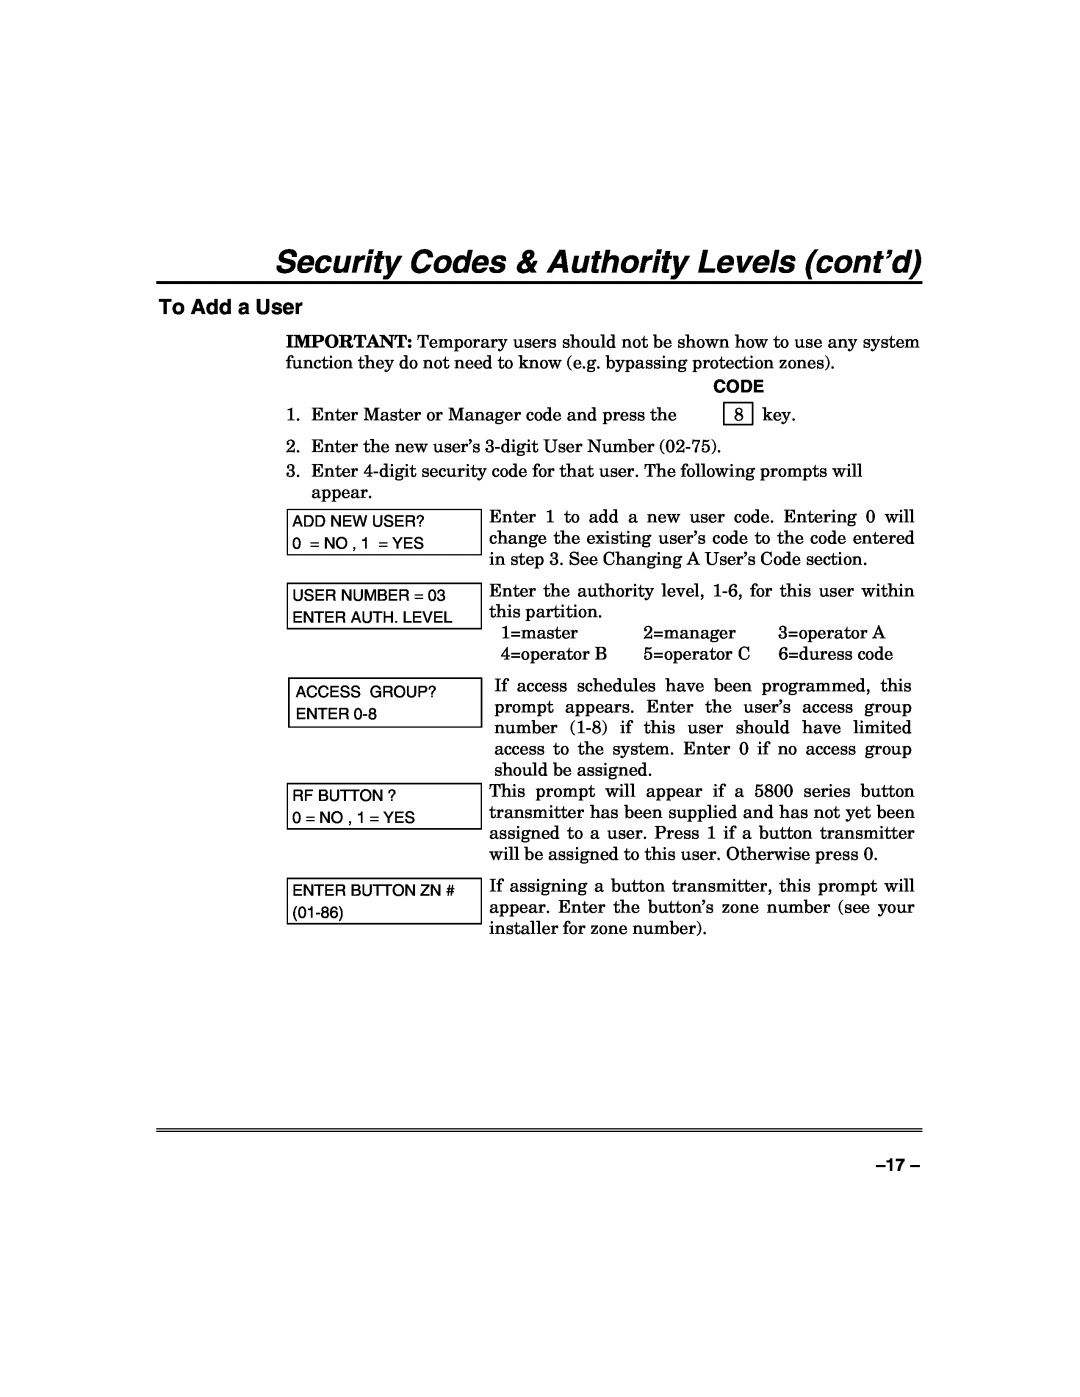 Honeywell VISTA-50PUL manual To Add a User, Security Codes & Authority Levels cont’d 